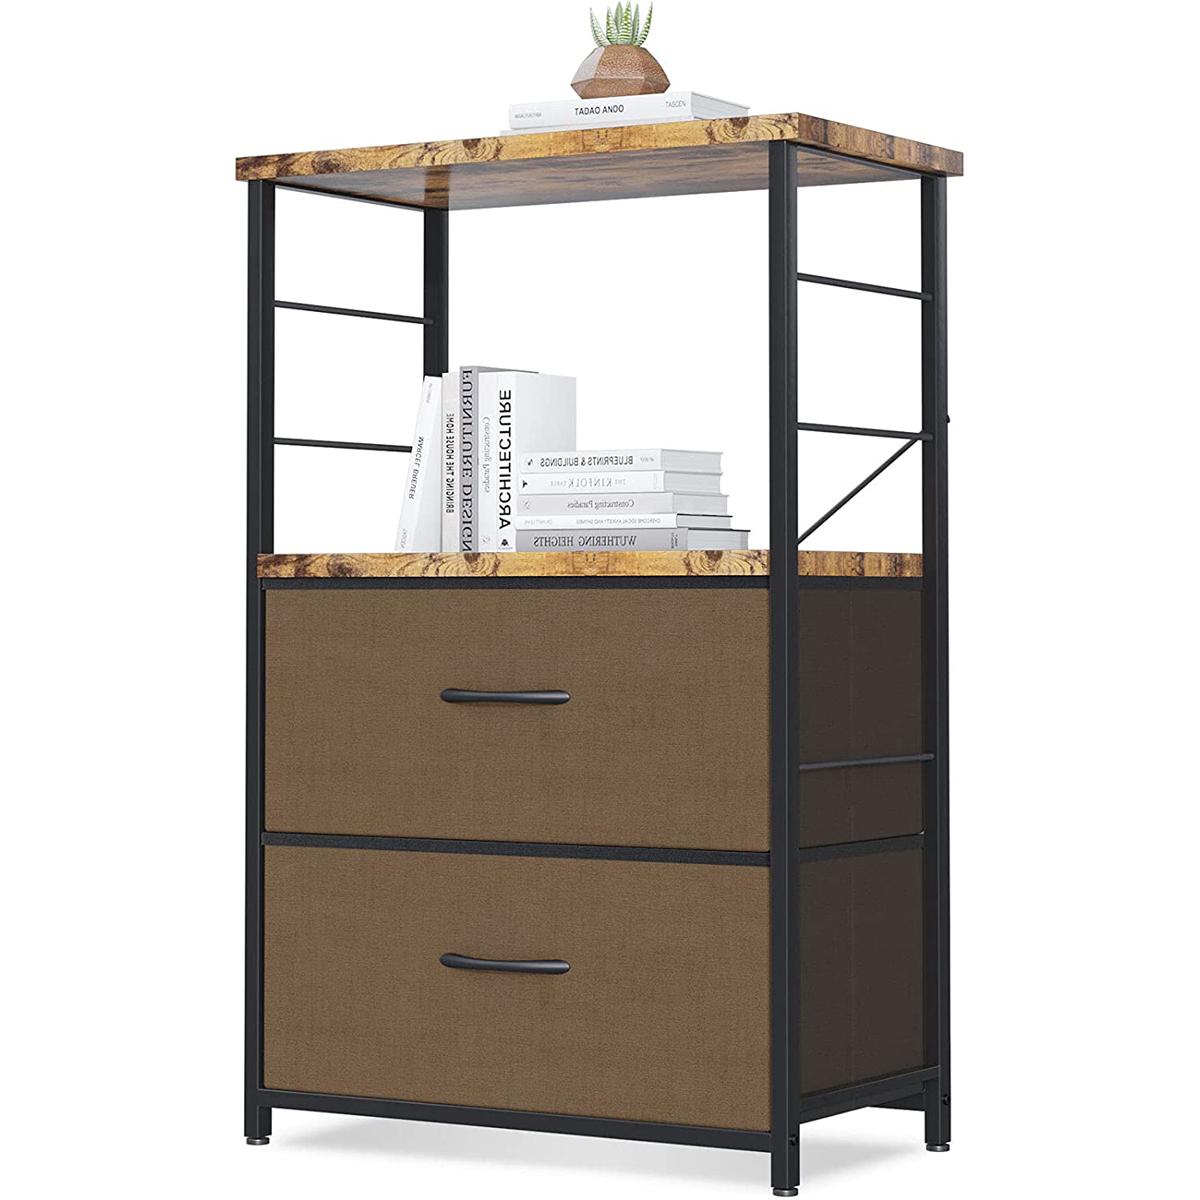 ODK Nightstand File Cabinet End Table with Drawer for $39.59 Shipped